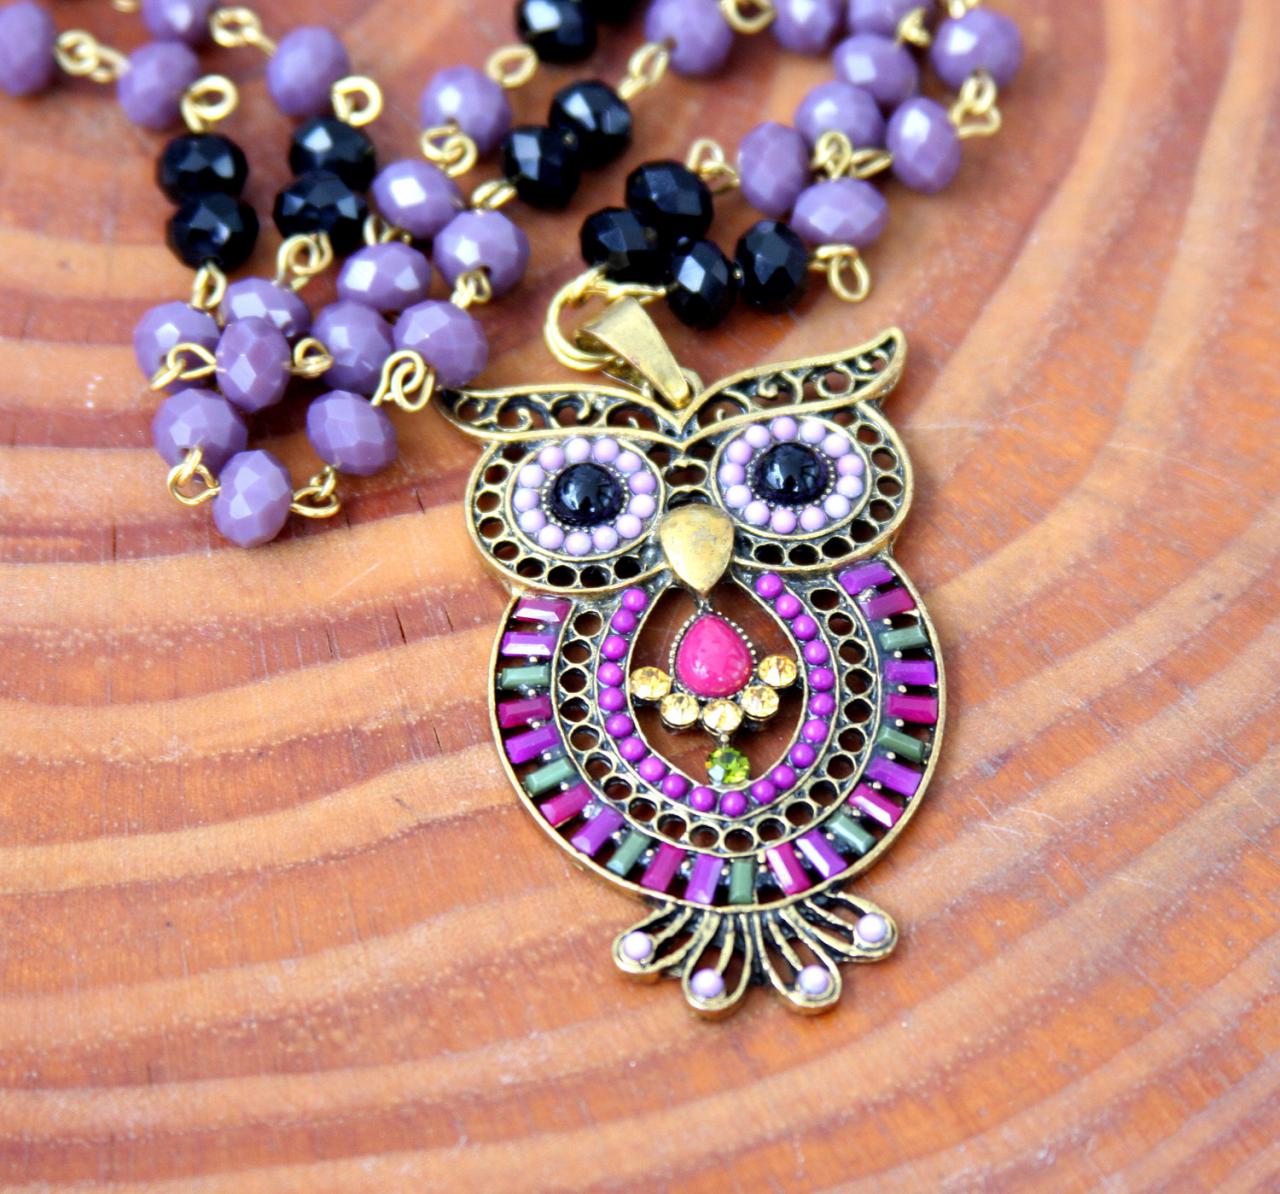 Owl Necklace Long, Big Owl Pendant, Beaded Jewelry, Christmas Gift For Her, Stocking Stuffer